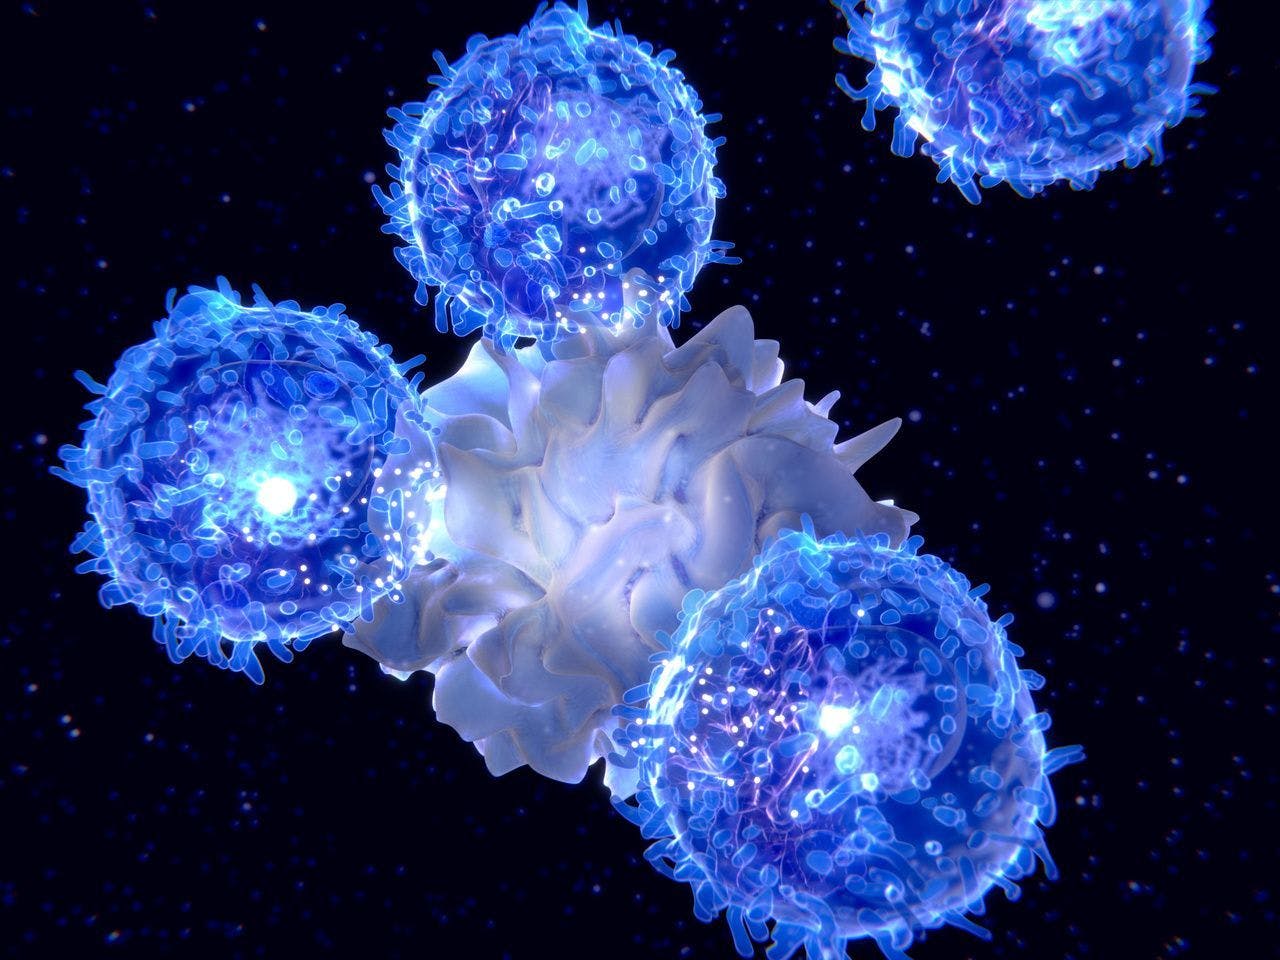 FDA Approves CAR T-Cell Therapy for Adults With R/R Mantle Cell Lymphoma